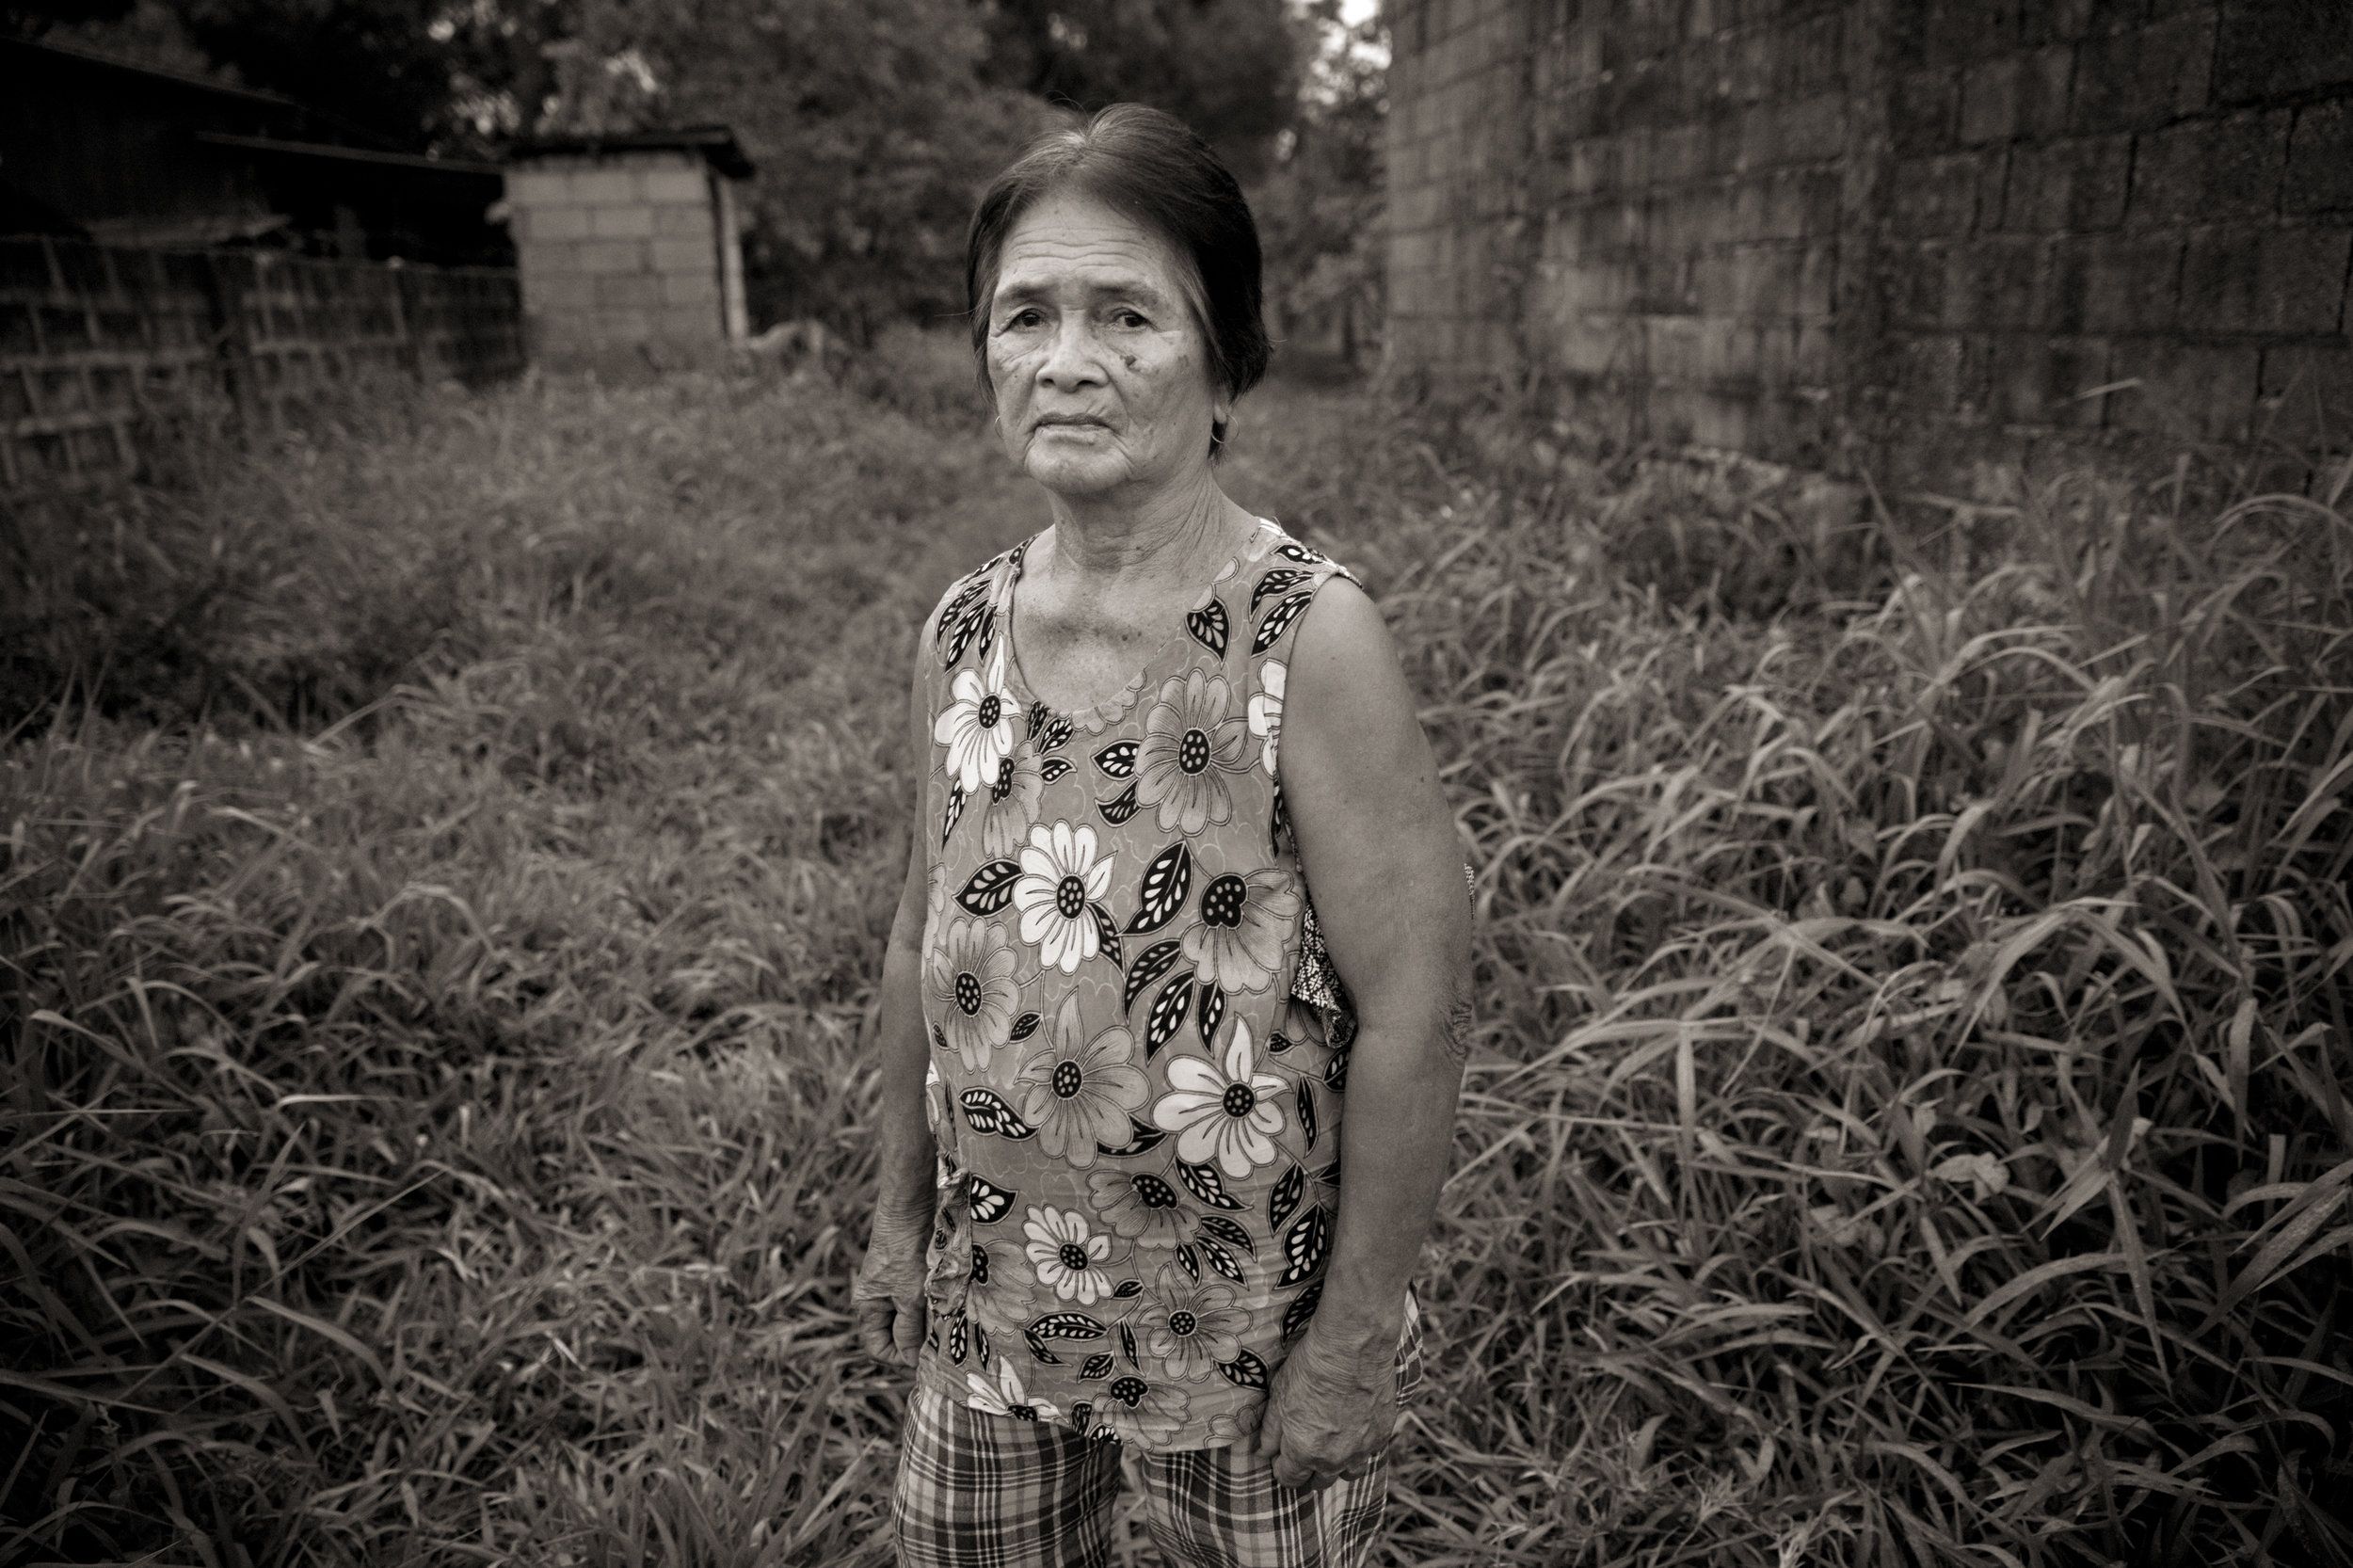 Francia Aga Buco was one of the more than 100 girls and women who were marched to the Red House in Pampanga province and raped by Japanese soldiers. She was then 14. Image by Cheryl Diaz Meyer. Philippines, 2019.